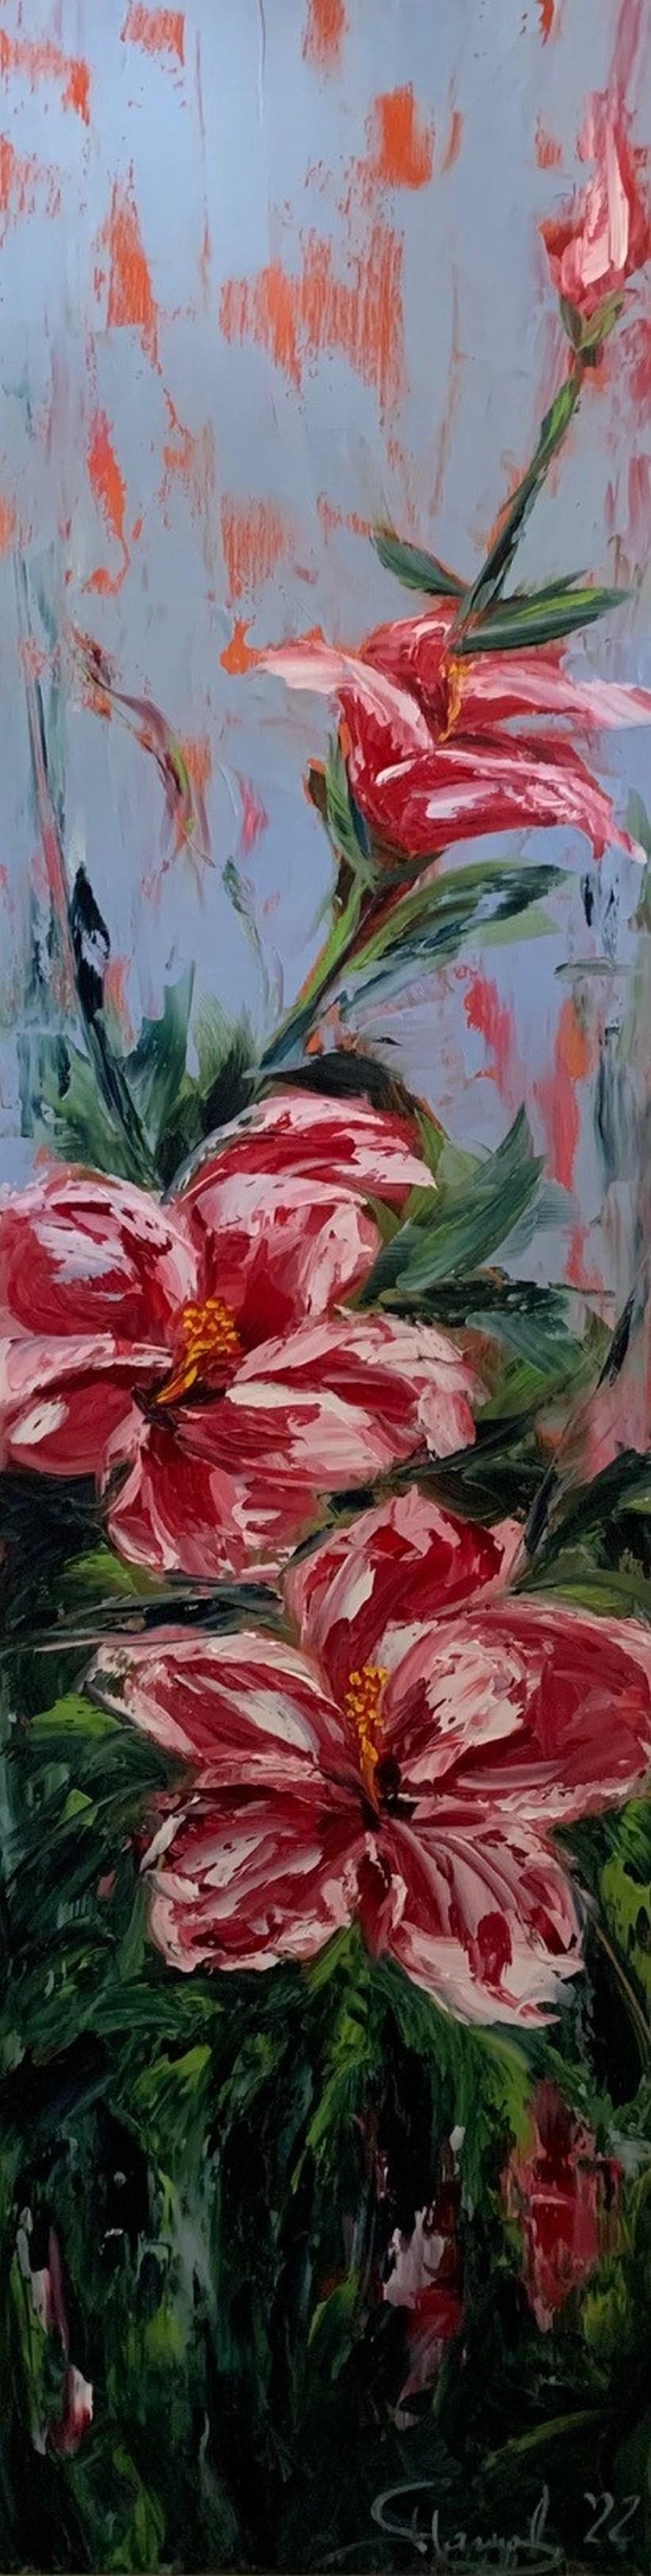 Hibiscus - Painting by Genevieve Hamel